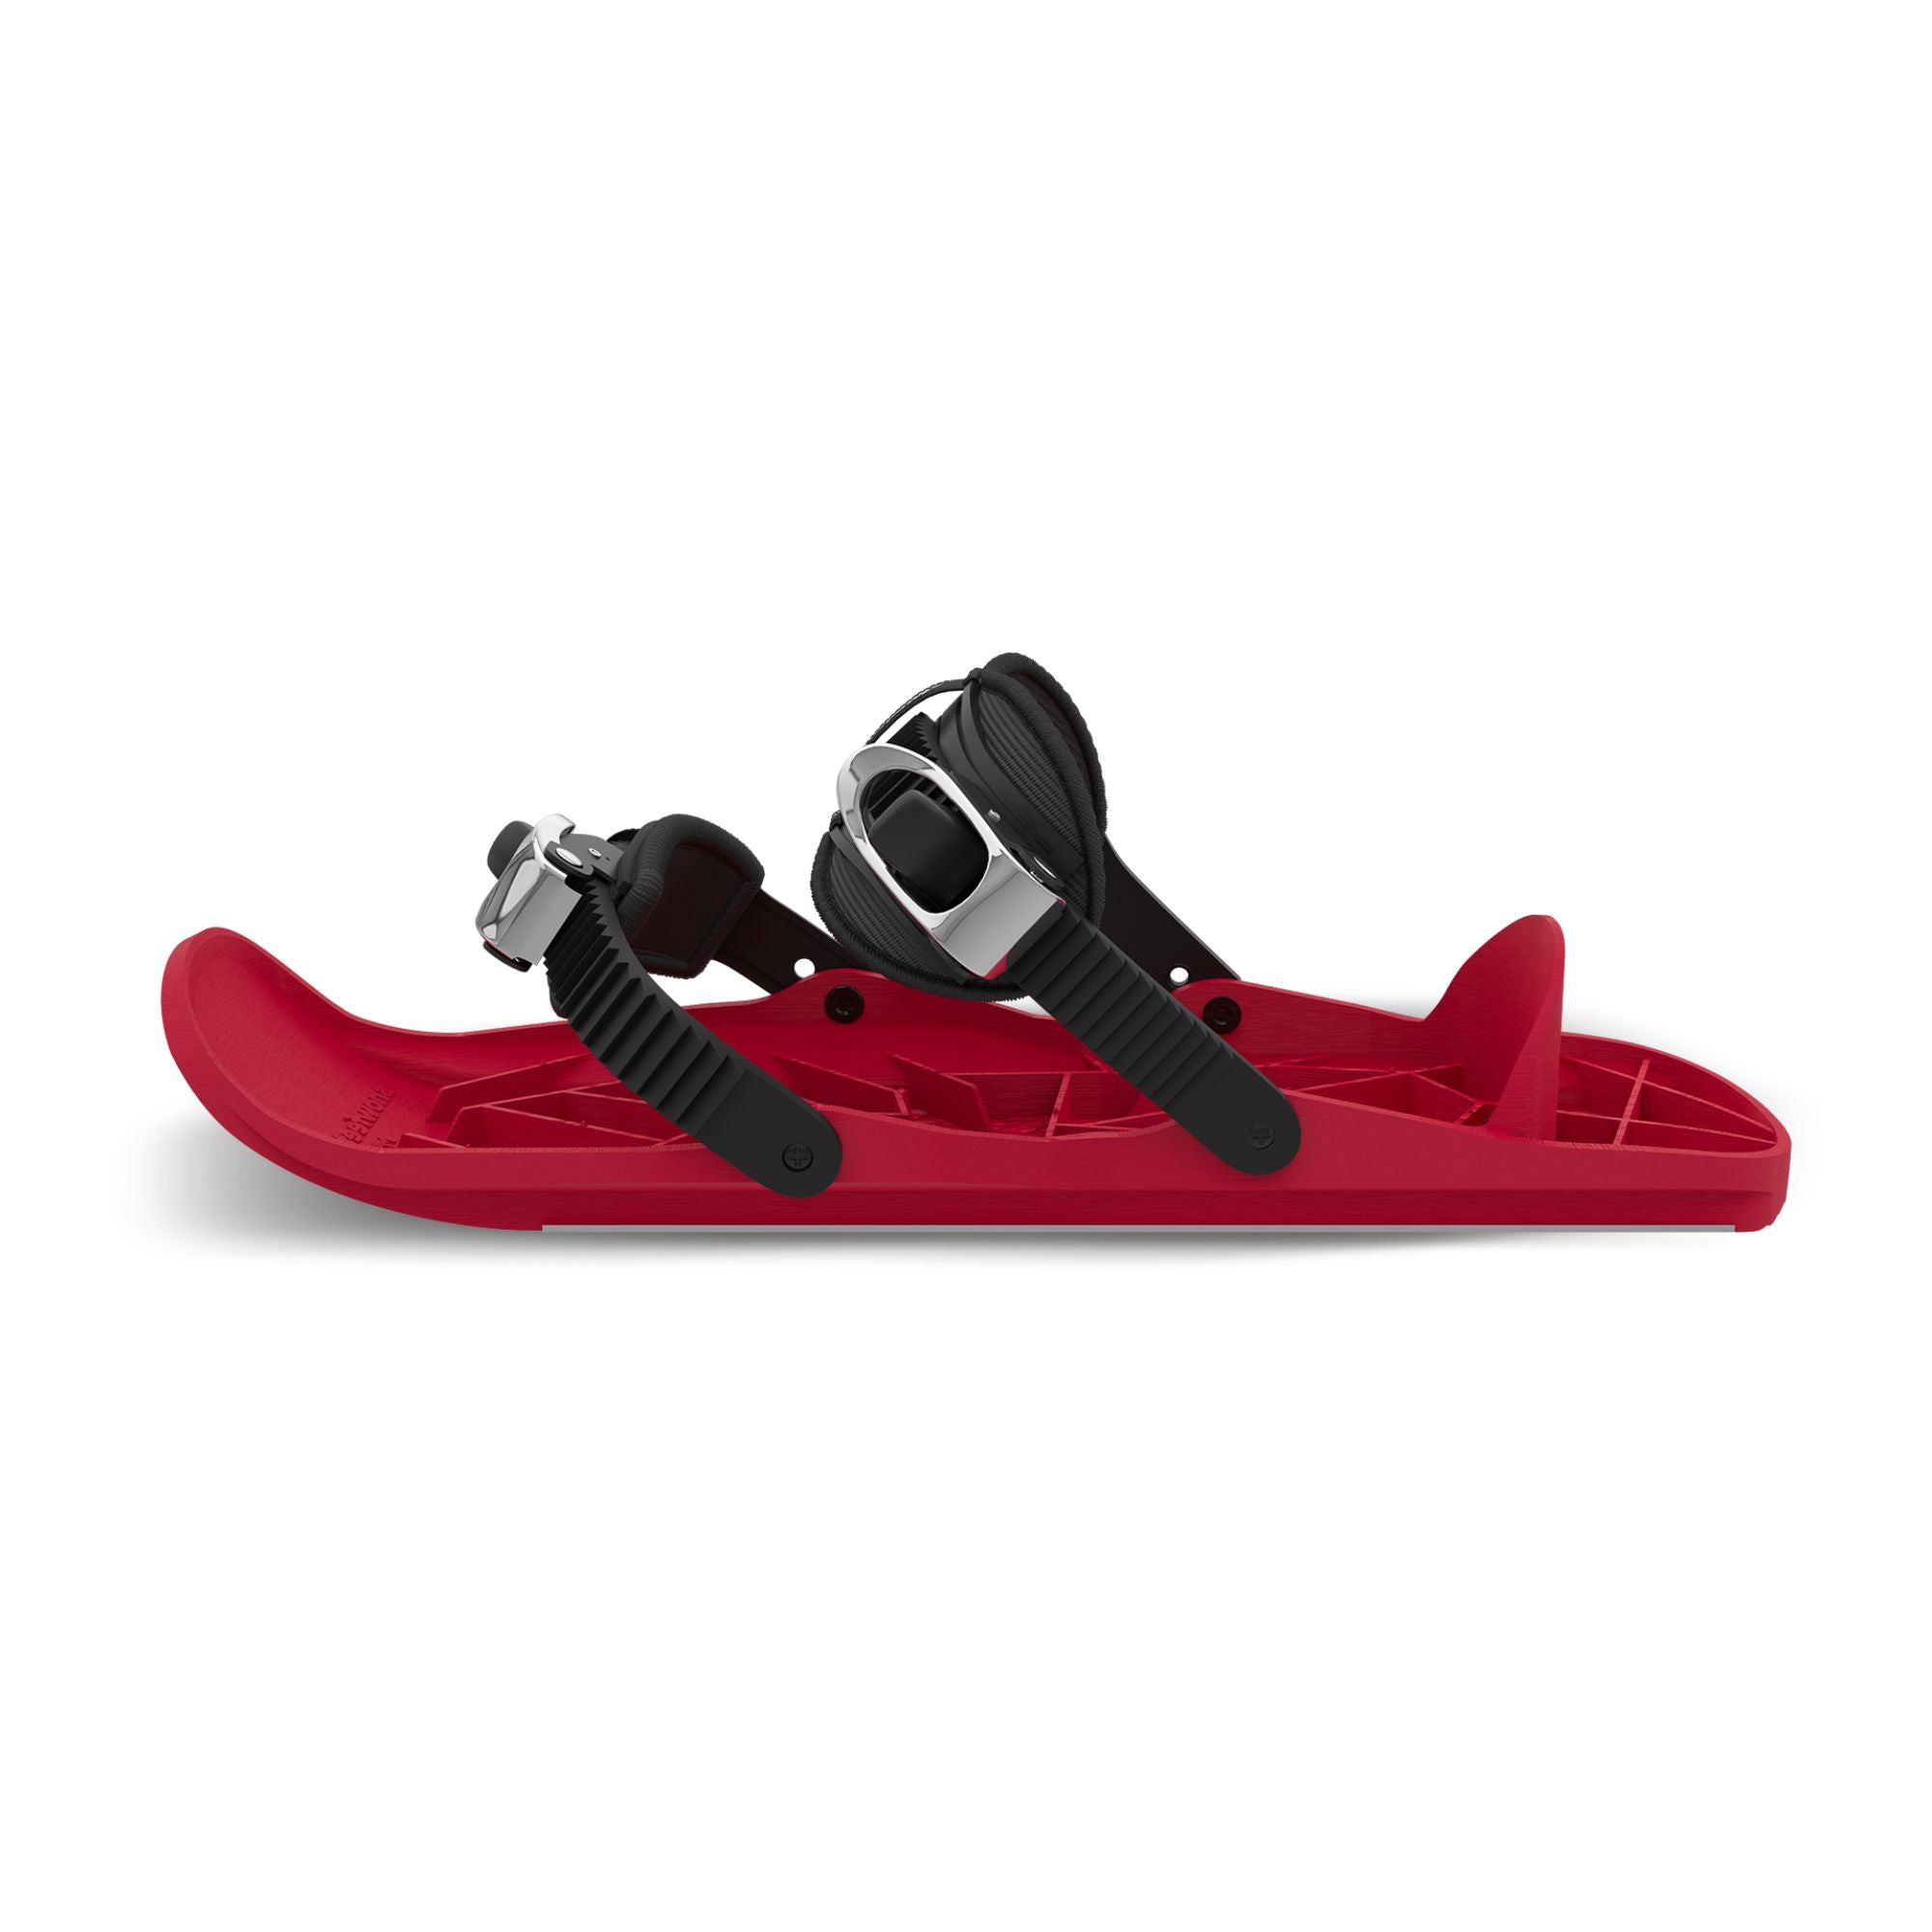 Shop - Buy for Sale - Mini Skis - Official Snowfeet